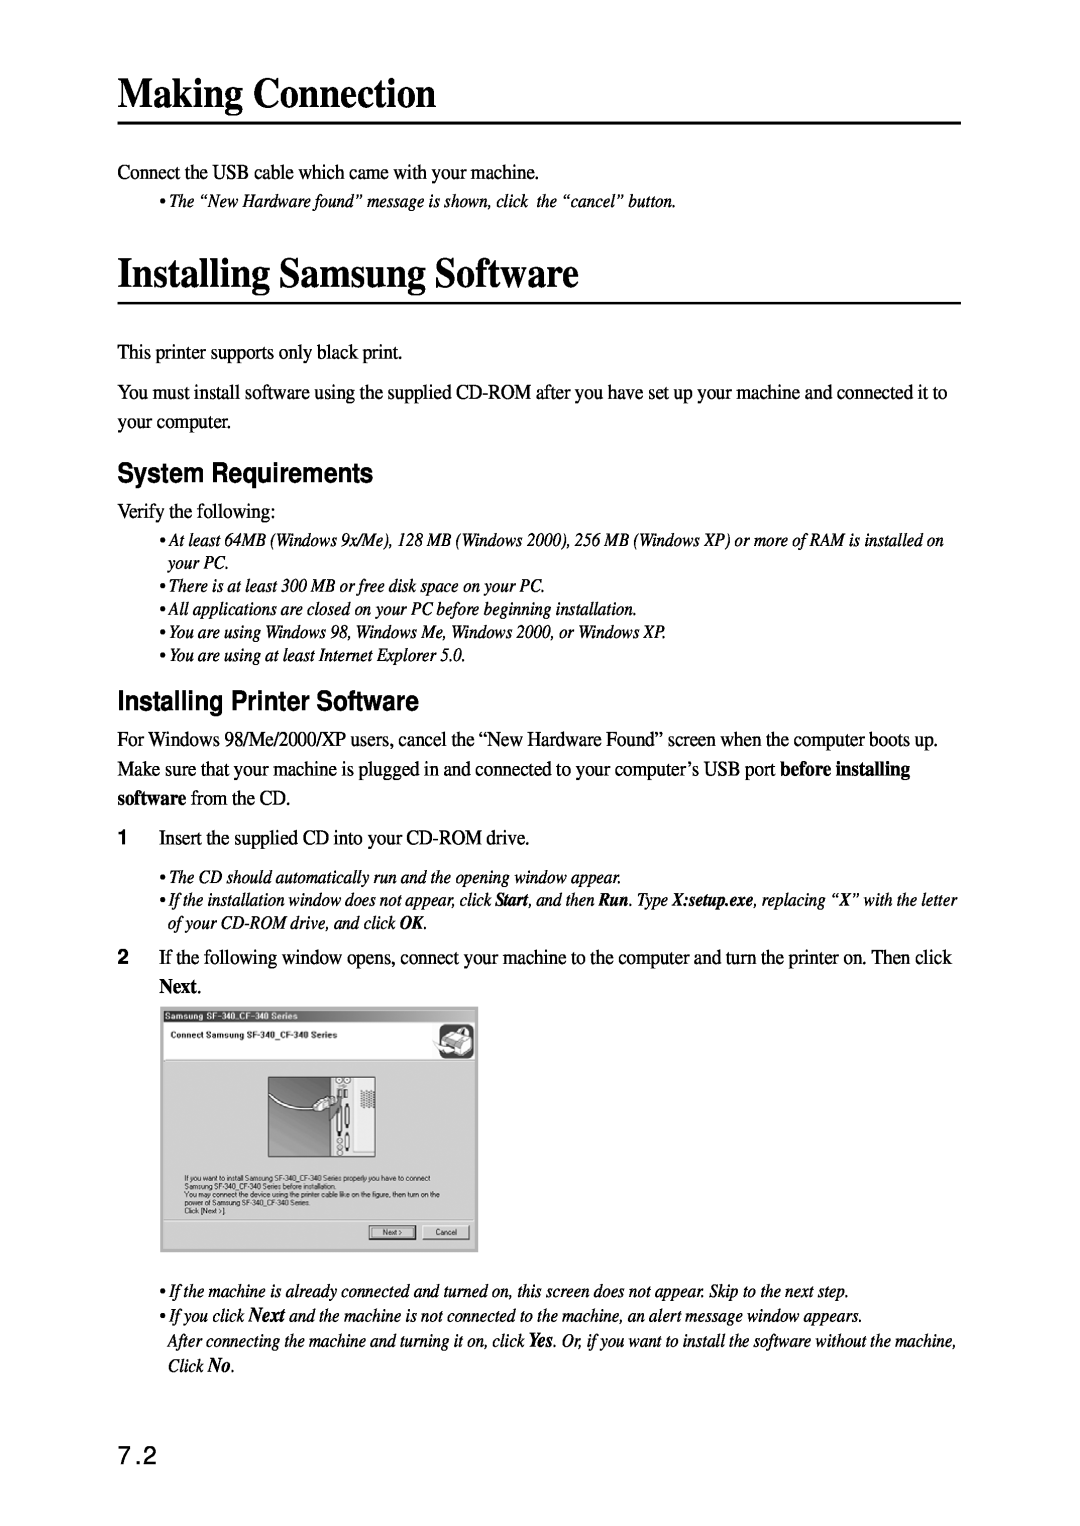 Samsung SF-340 Series Making Connection, Installing Samsung Software, System Requirements, Installing Printer Software 